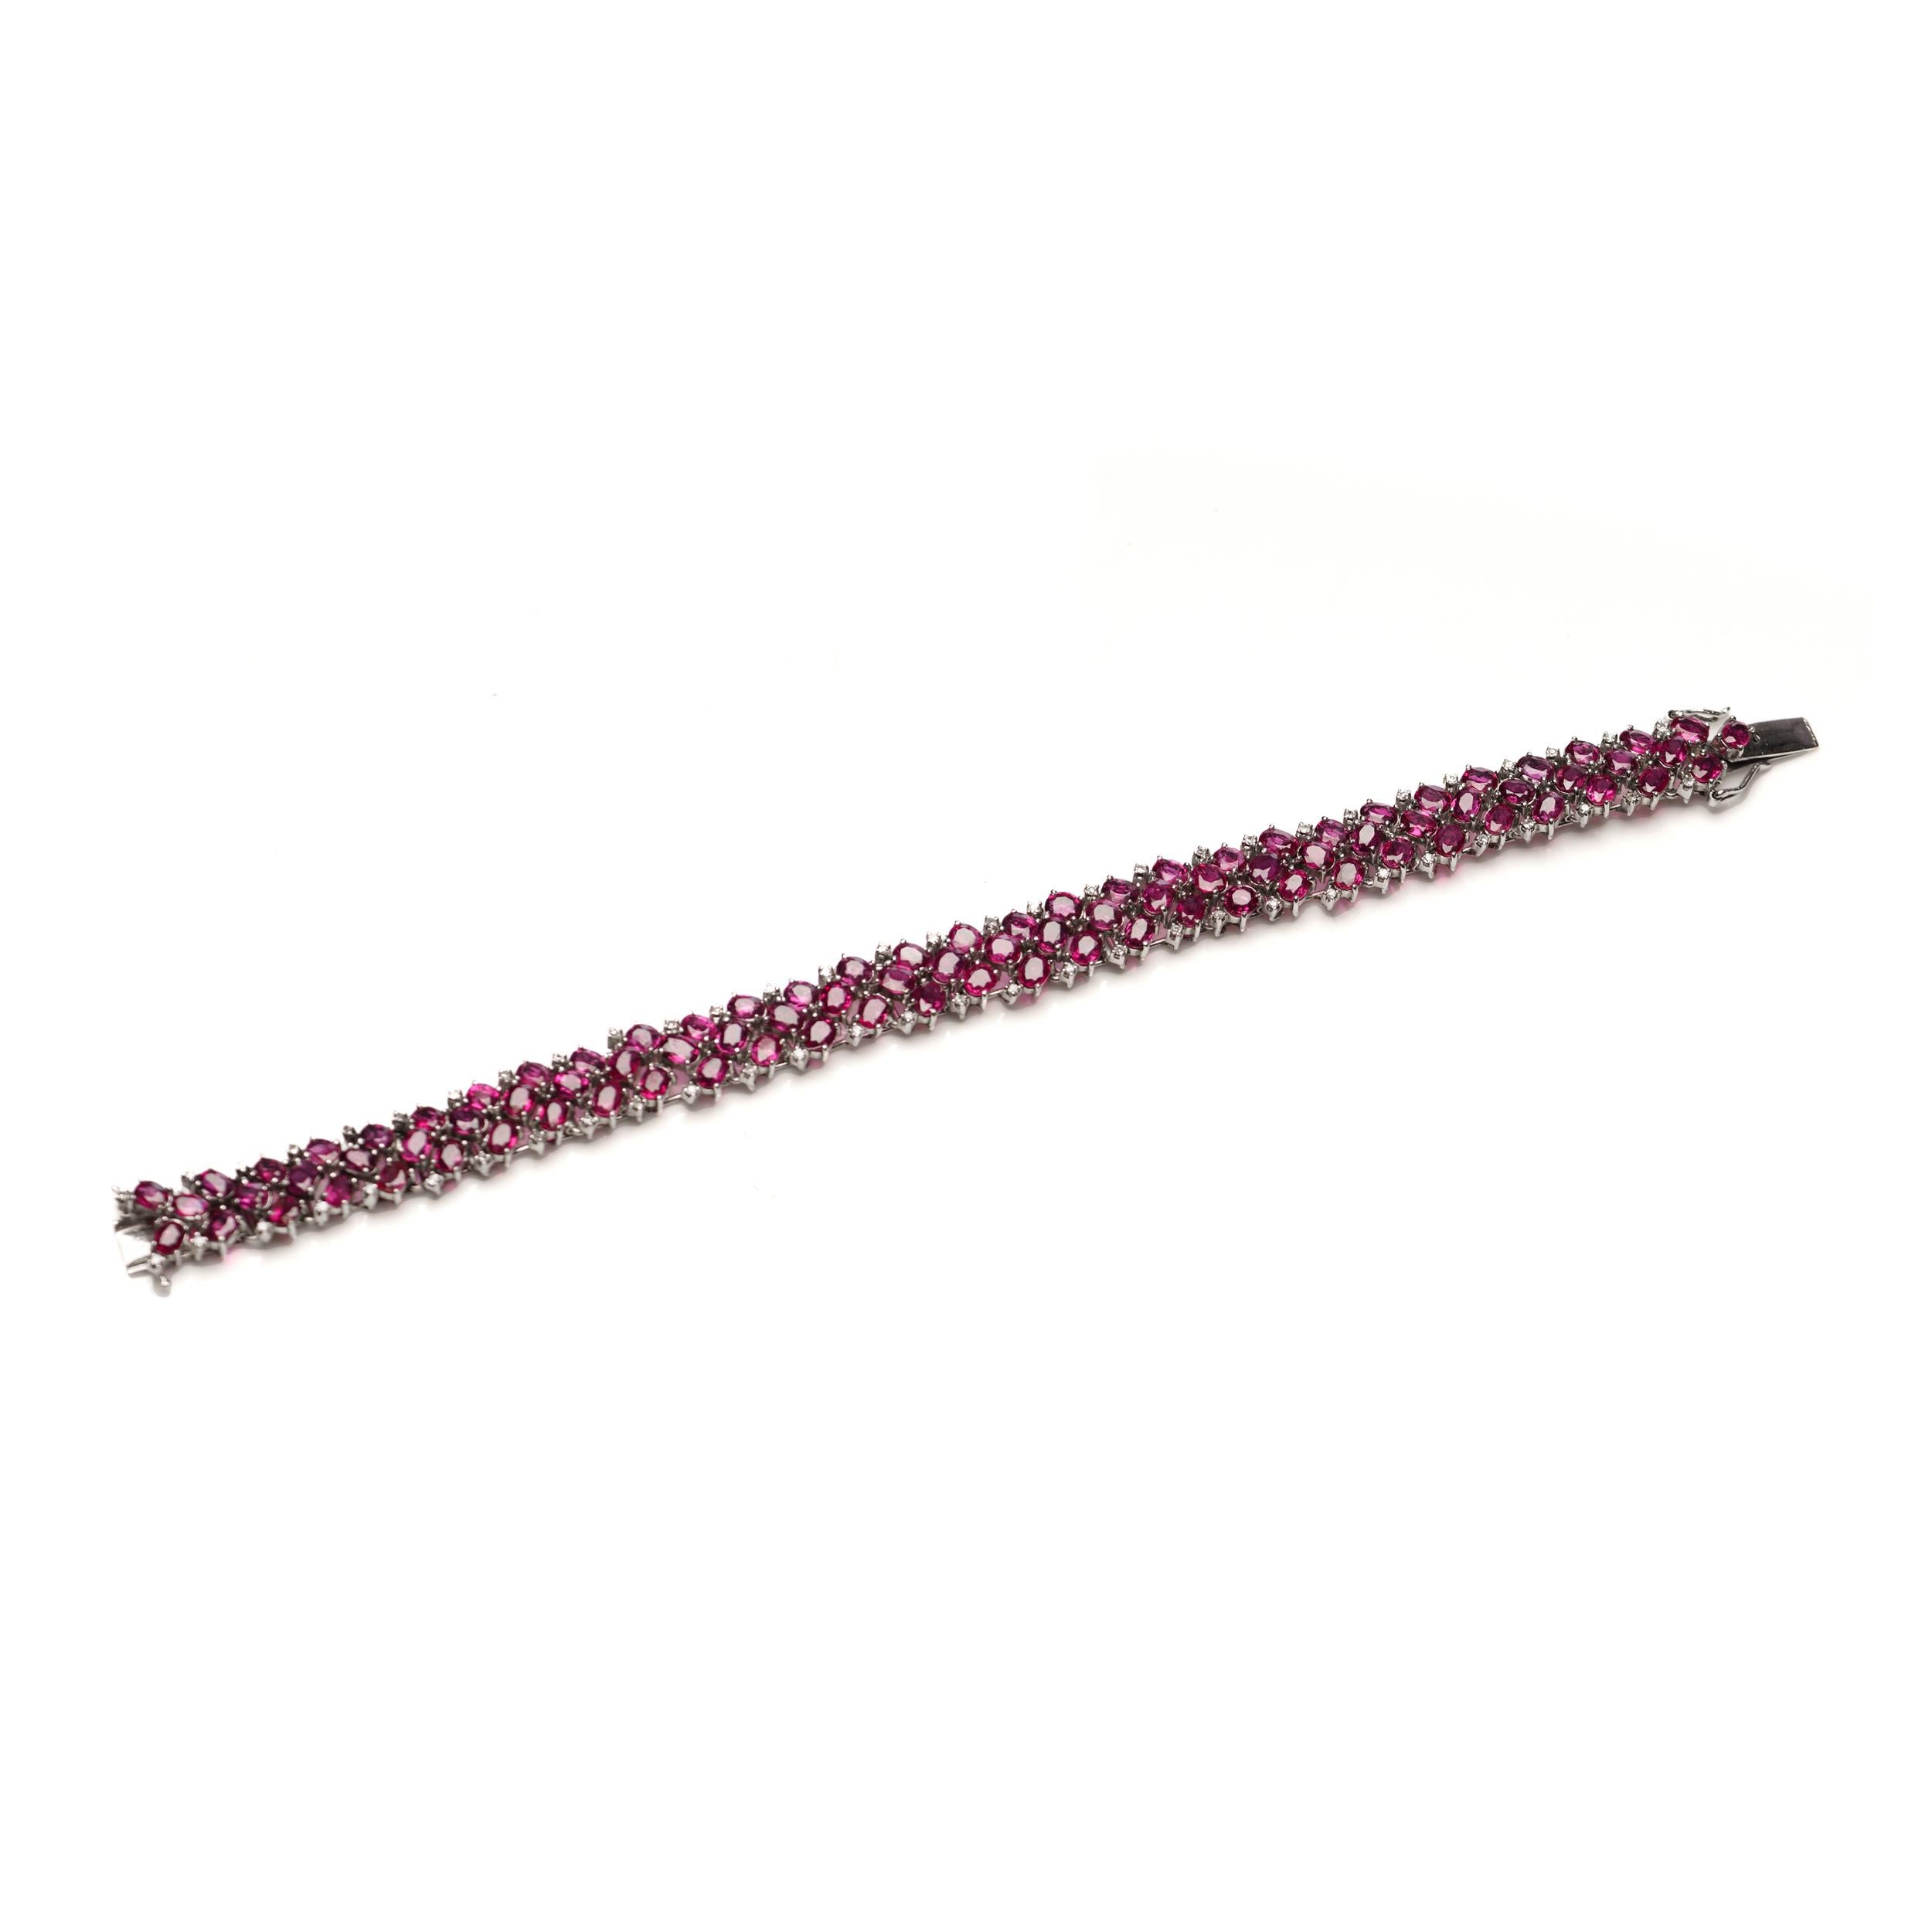 14kt. white gold link bracelet set with 22.5 carats of oval faceted rubies  For Sale 6